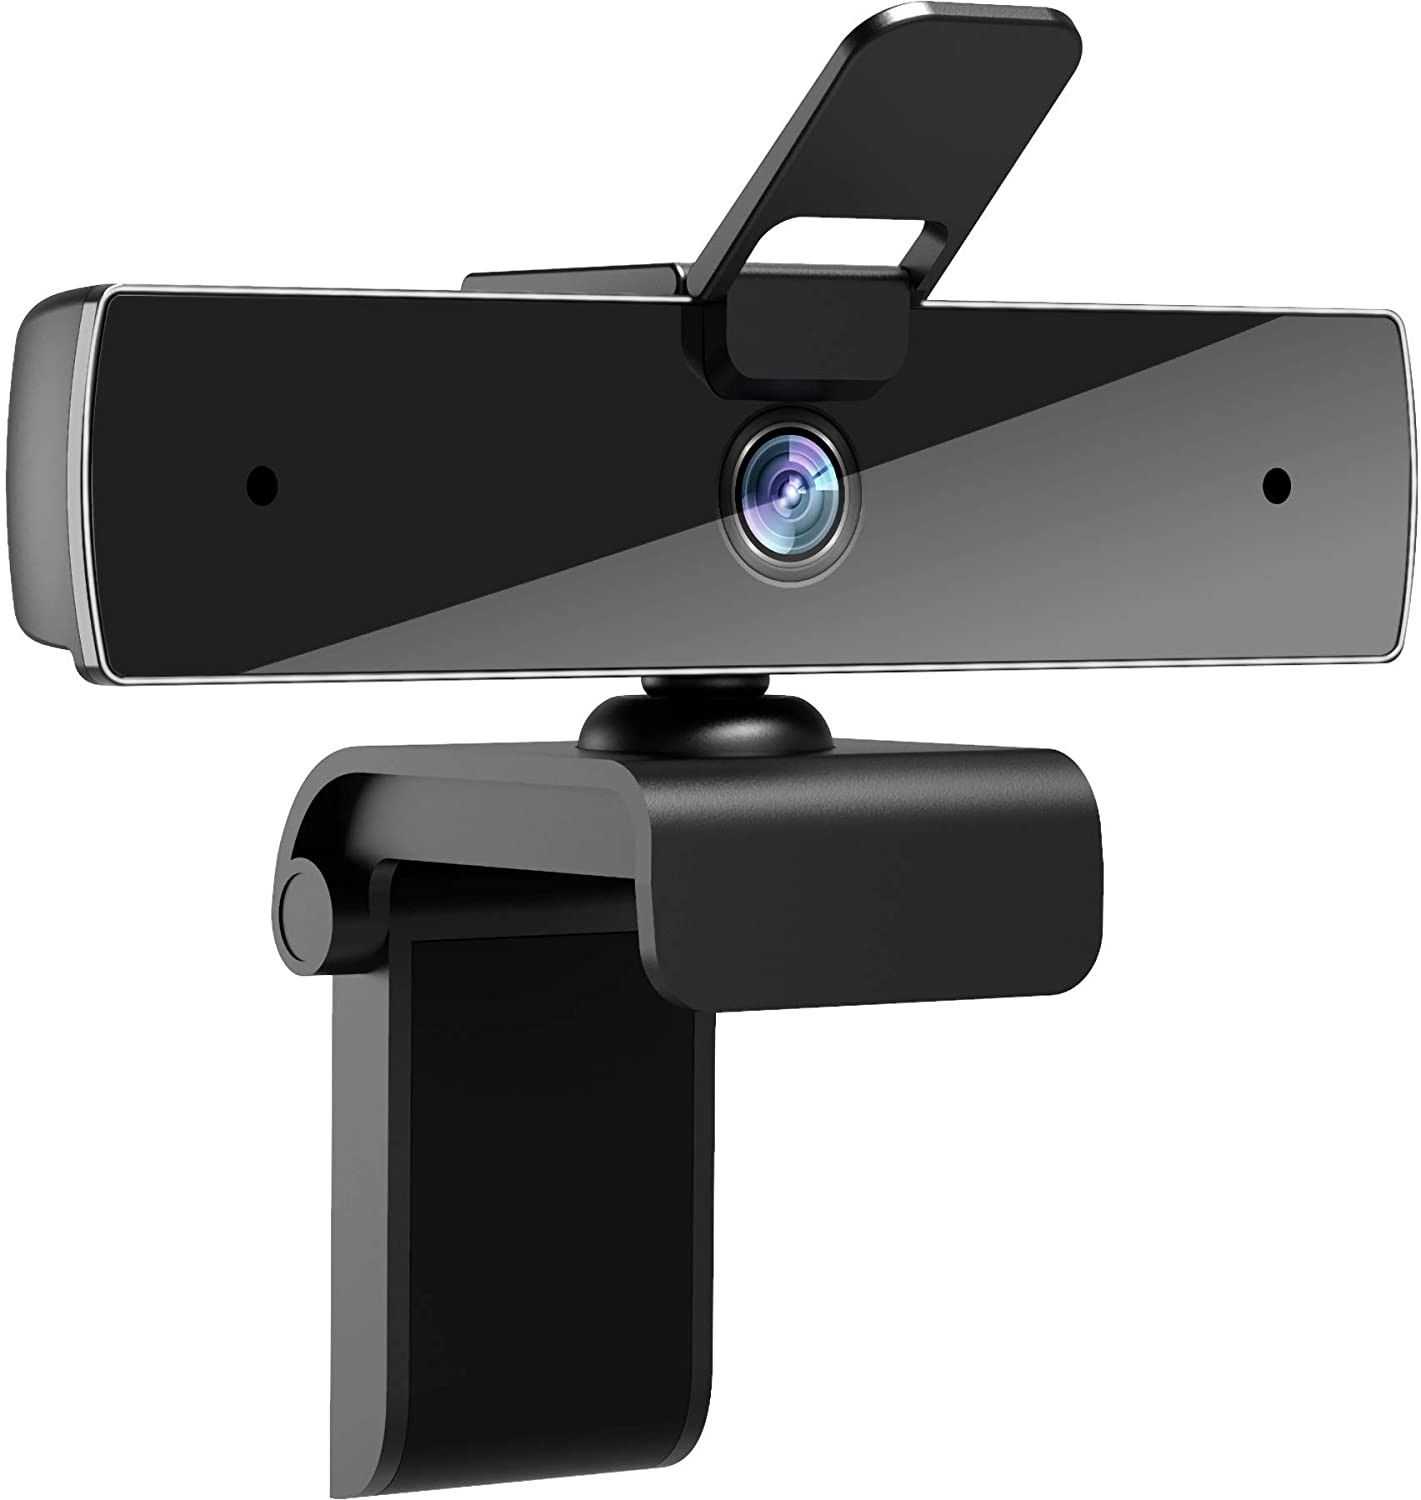 Webcam with Microphone QTNIUE FHD Webcam 1080p,USB Camerafor Video Calling, Stereo Streaming and Online Classes